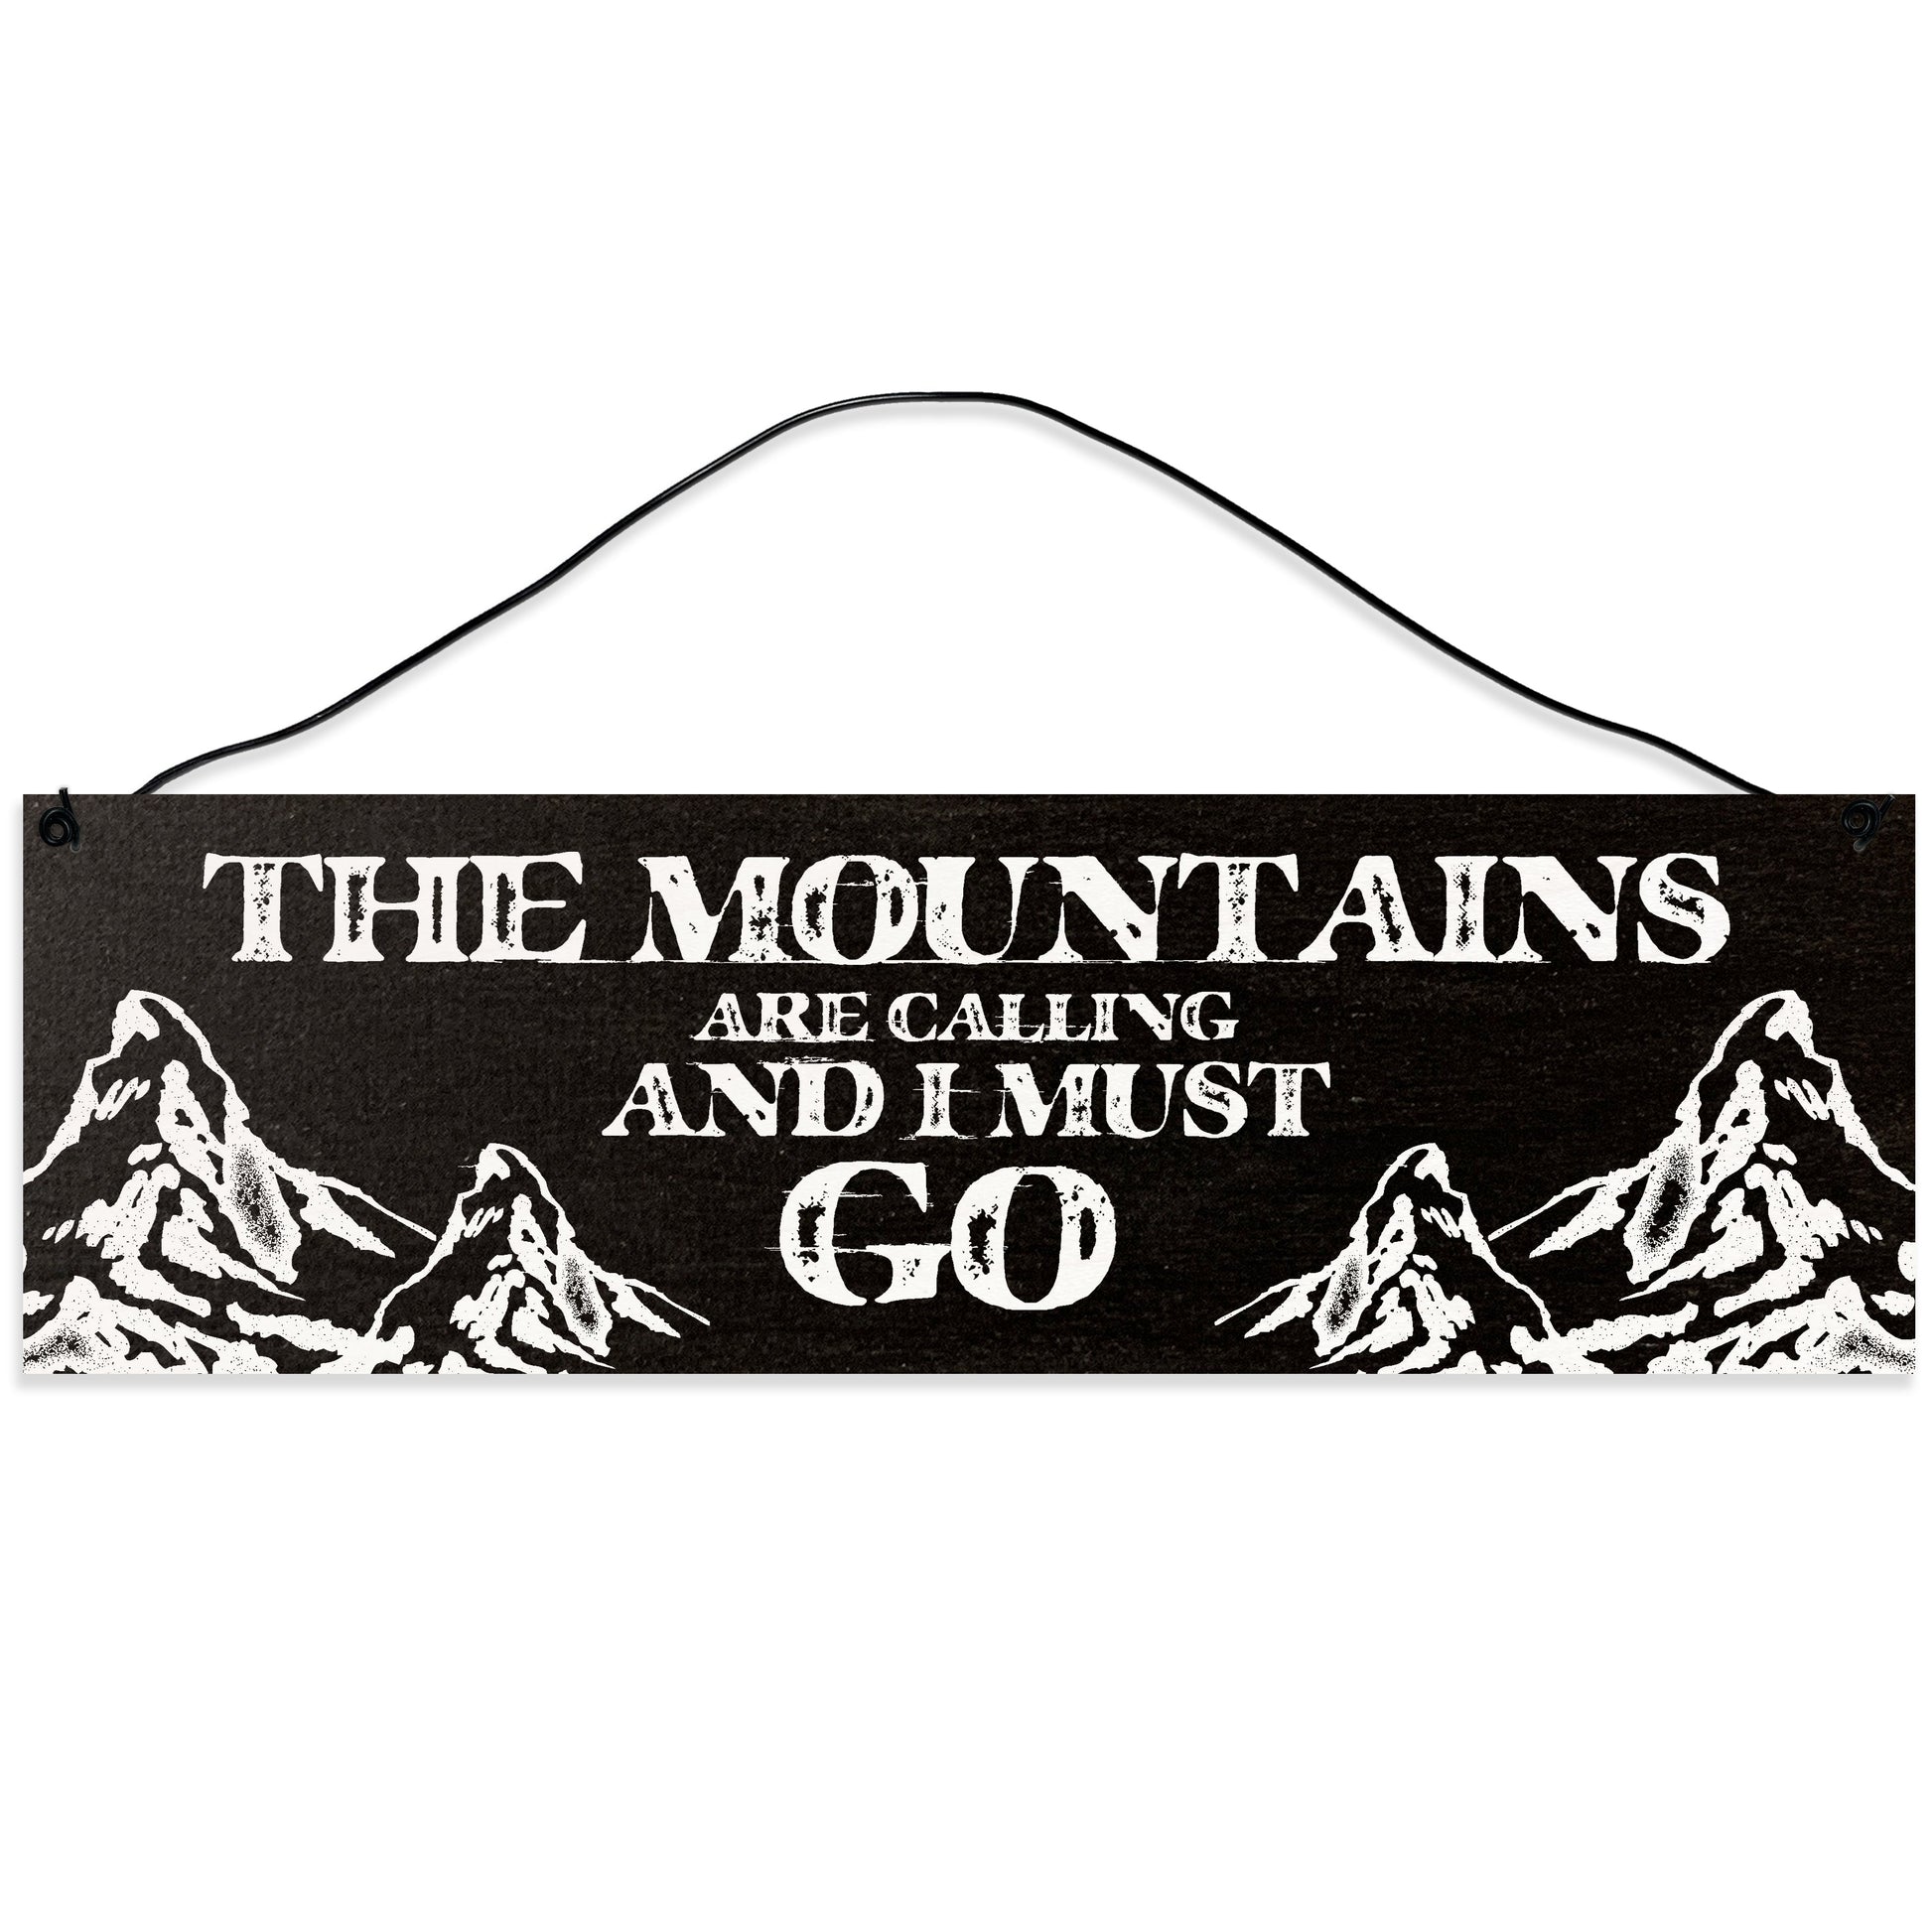 Sawyer's Mill - The Mountains are Calling and I Must Go. Wood Sign for Home or Office. Measures 3x10 inches.